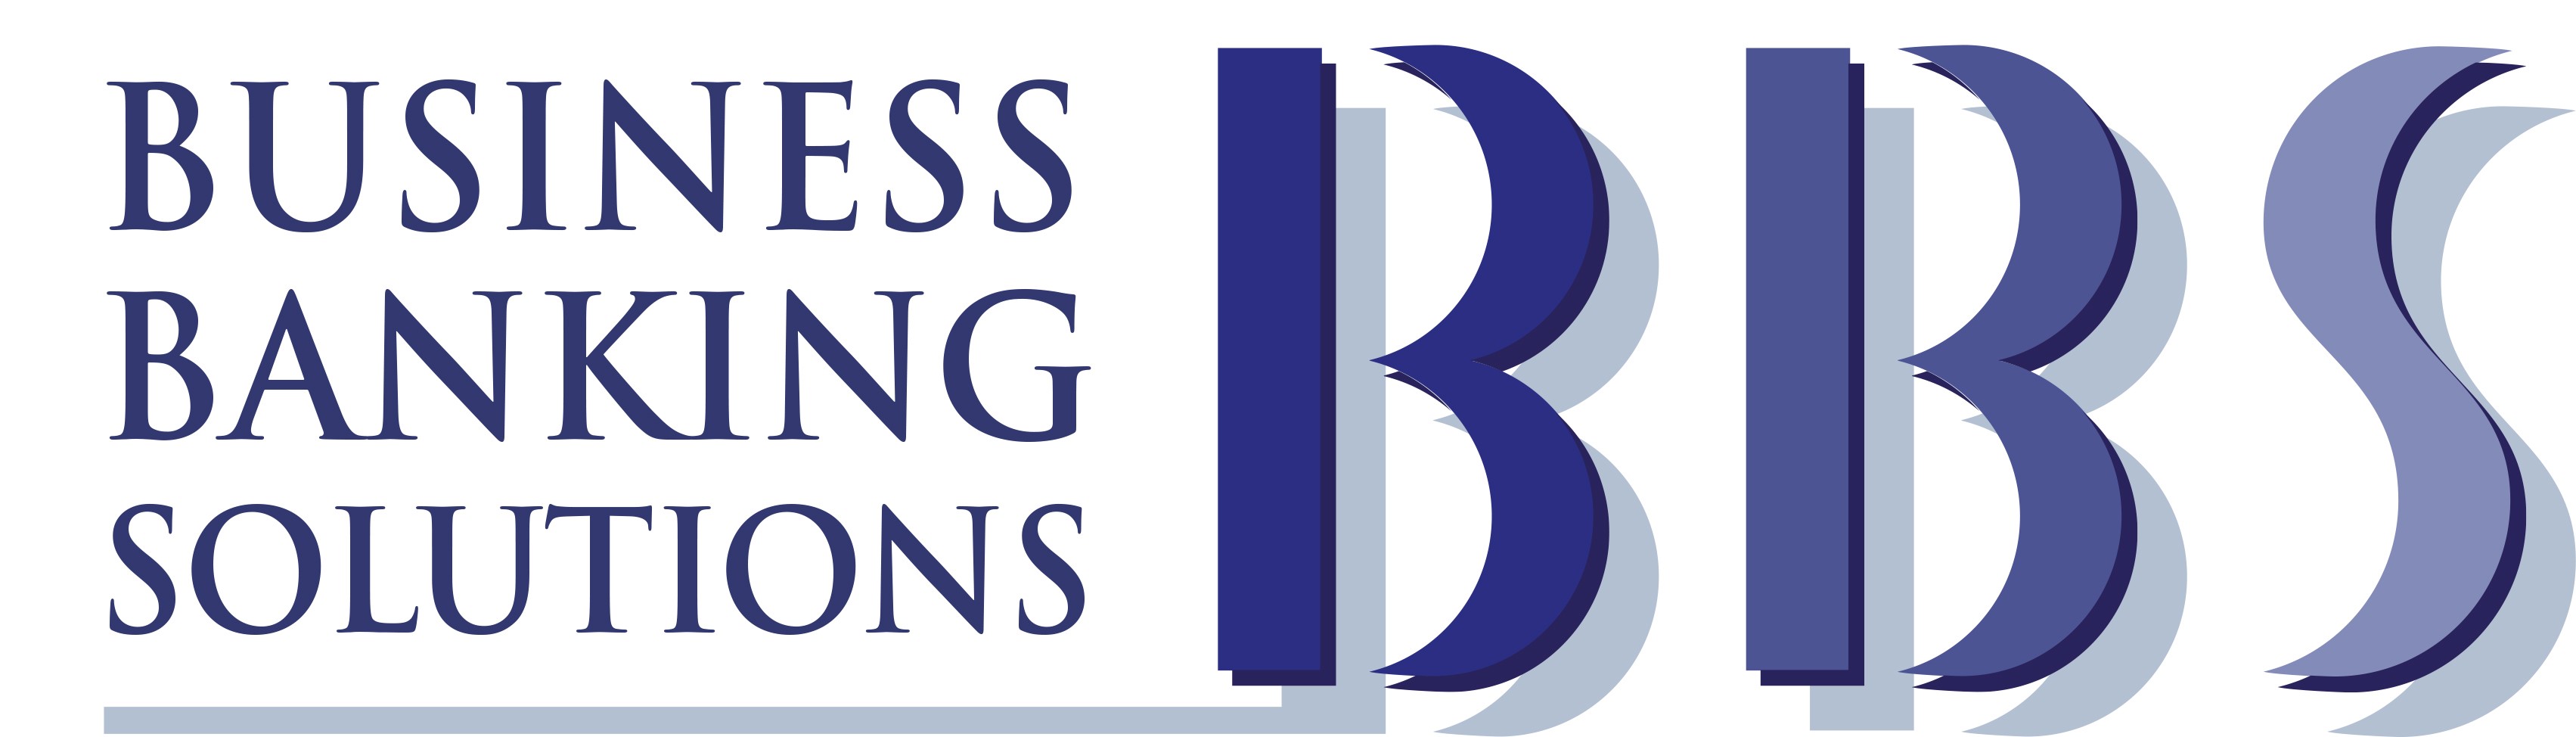 busines_banking_solutions_logo